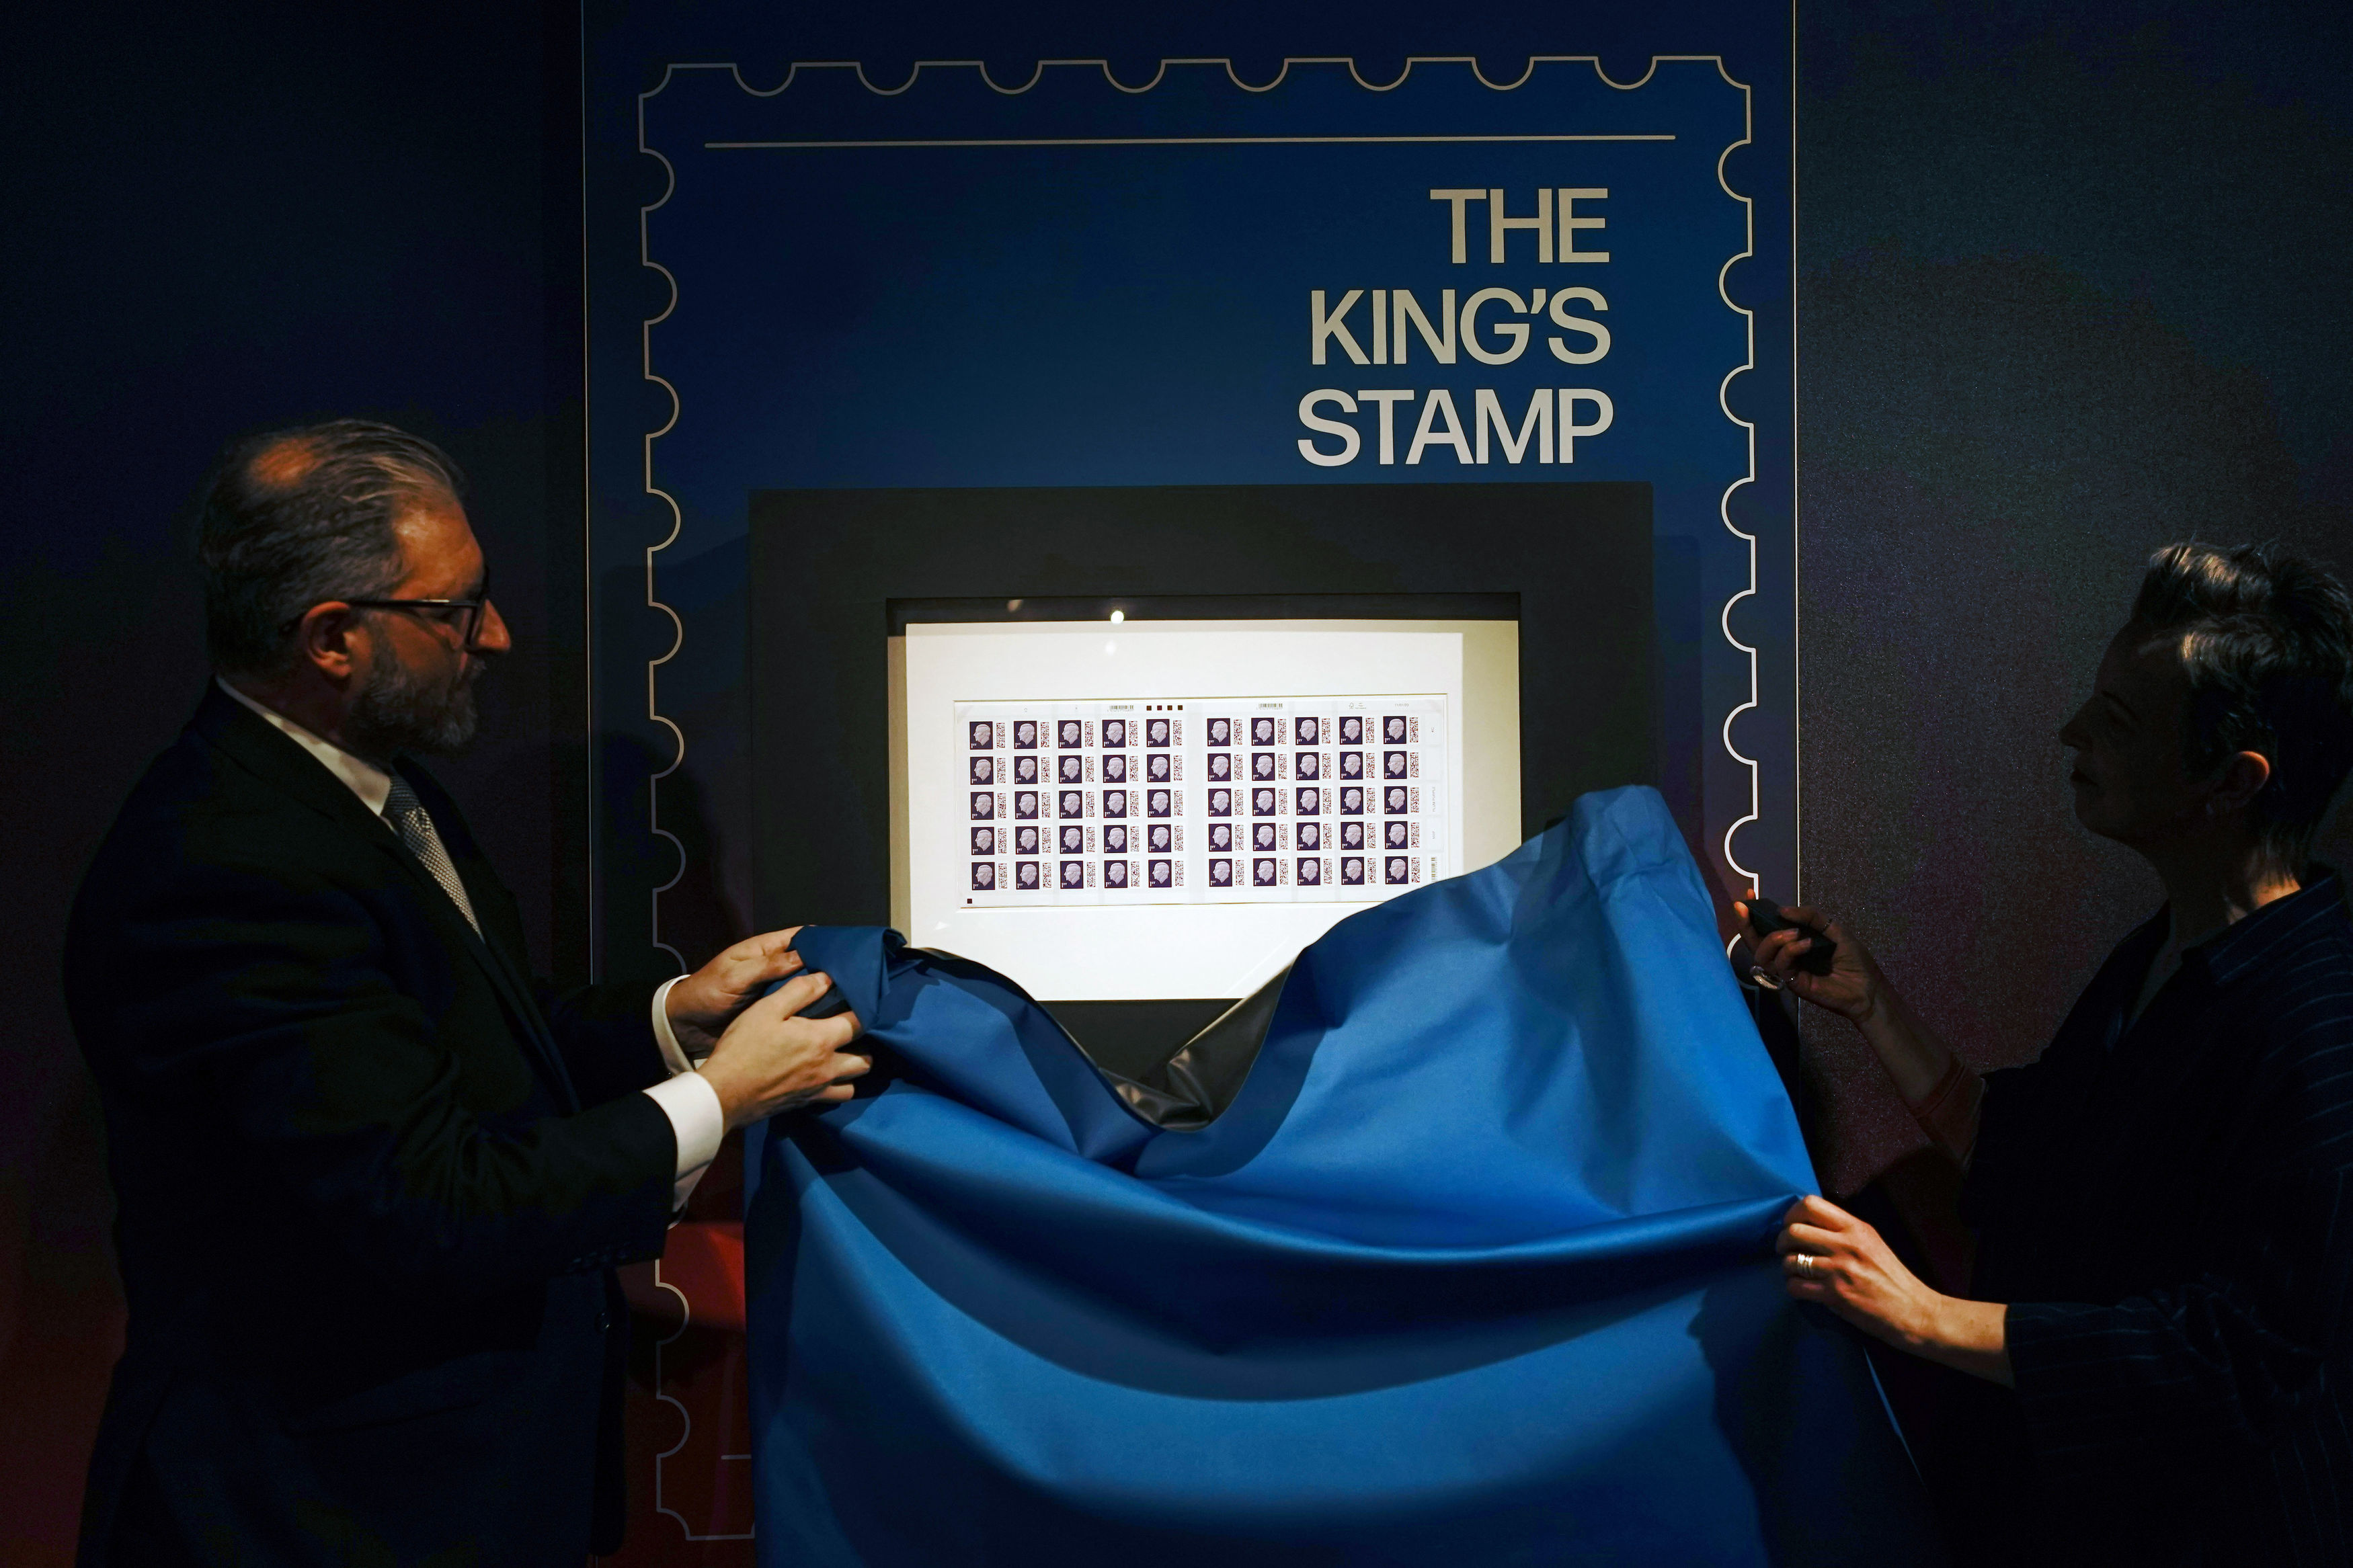 The image used of the King, which shows him facing to the left, is an adapted version of the portrait created by Martin Jennings for the Royal Mint